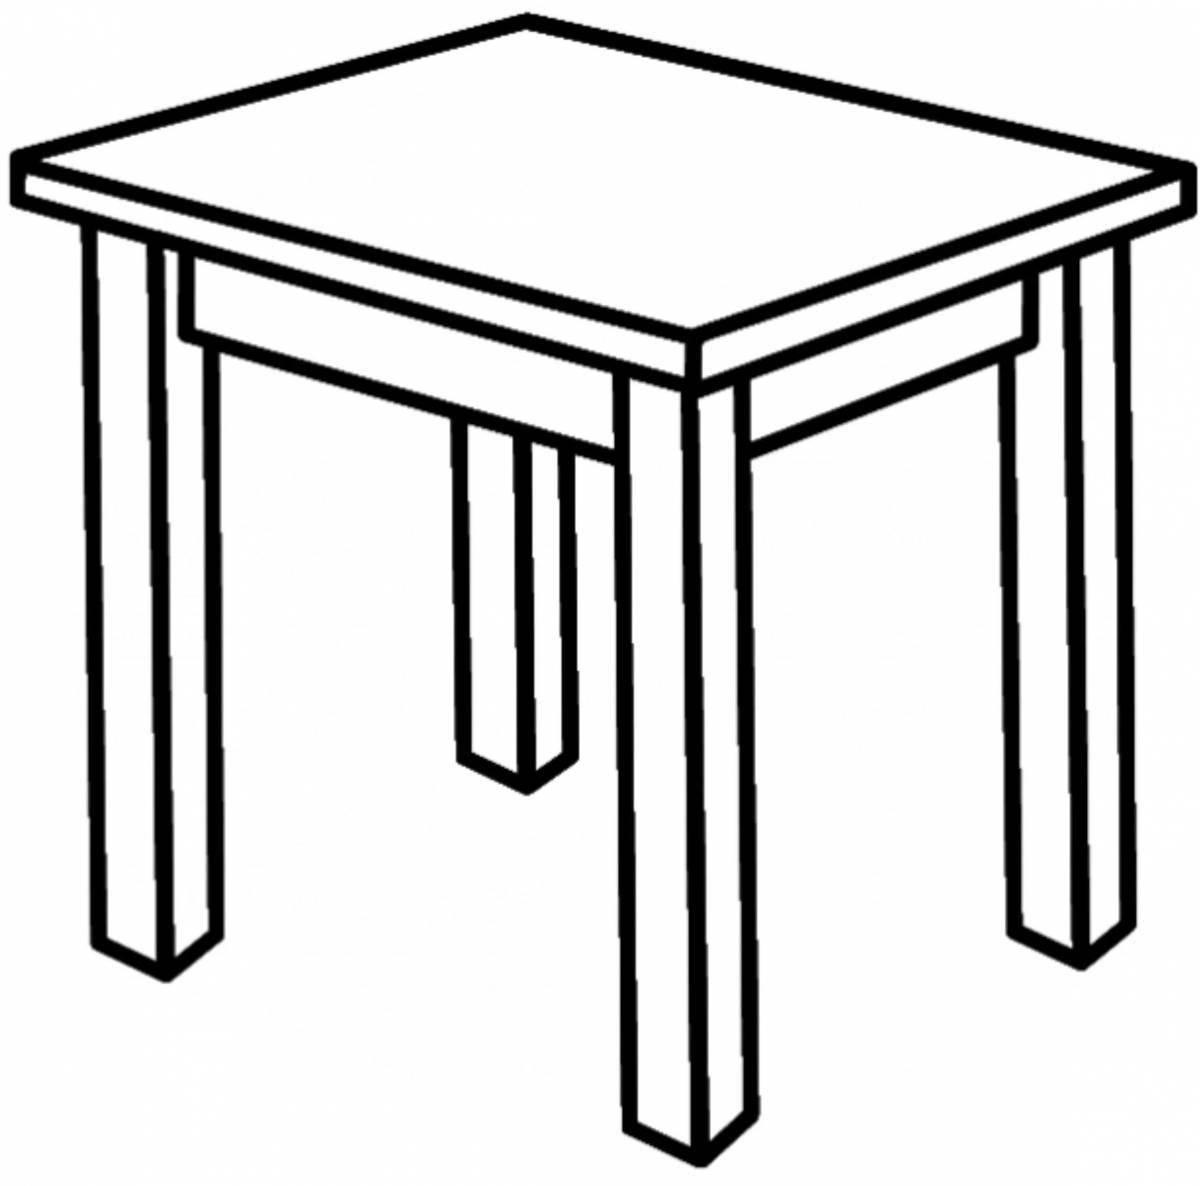 Charming stool coloring page